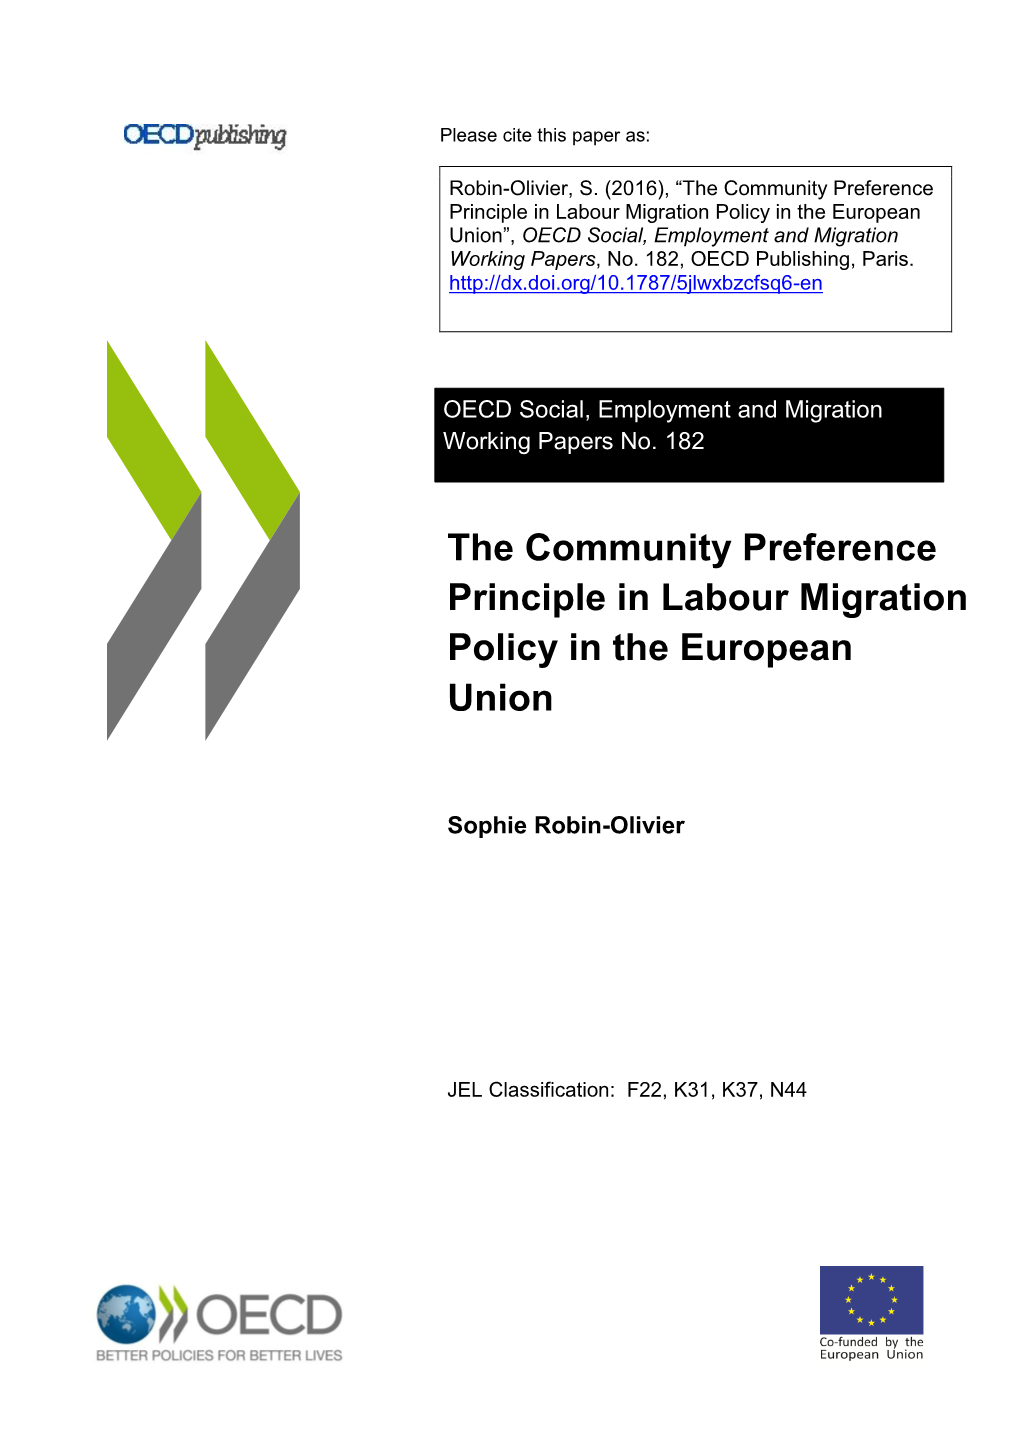 The Community Preference Principle in Labour Migration Policy in the European Union”, OECD Social, Employment and Migration Working Papers, No